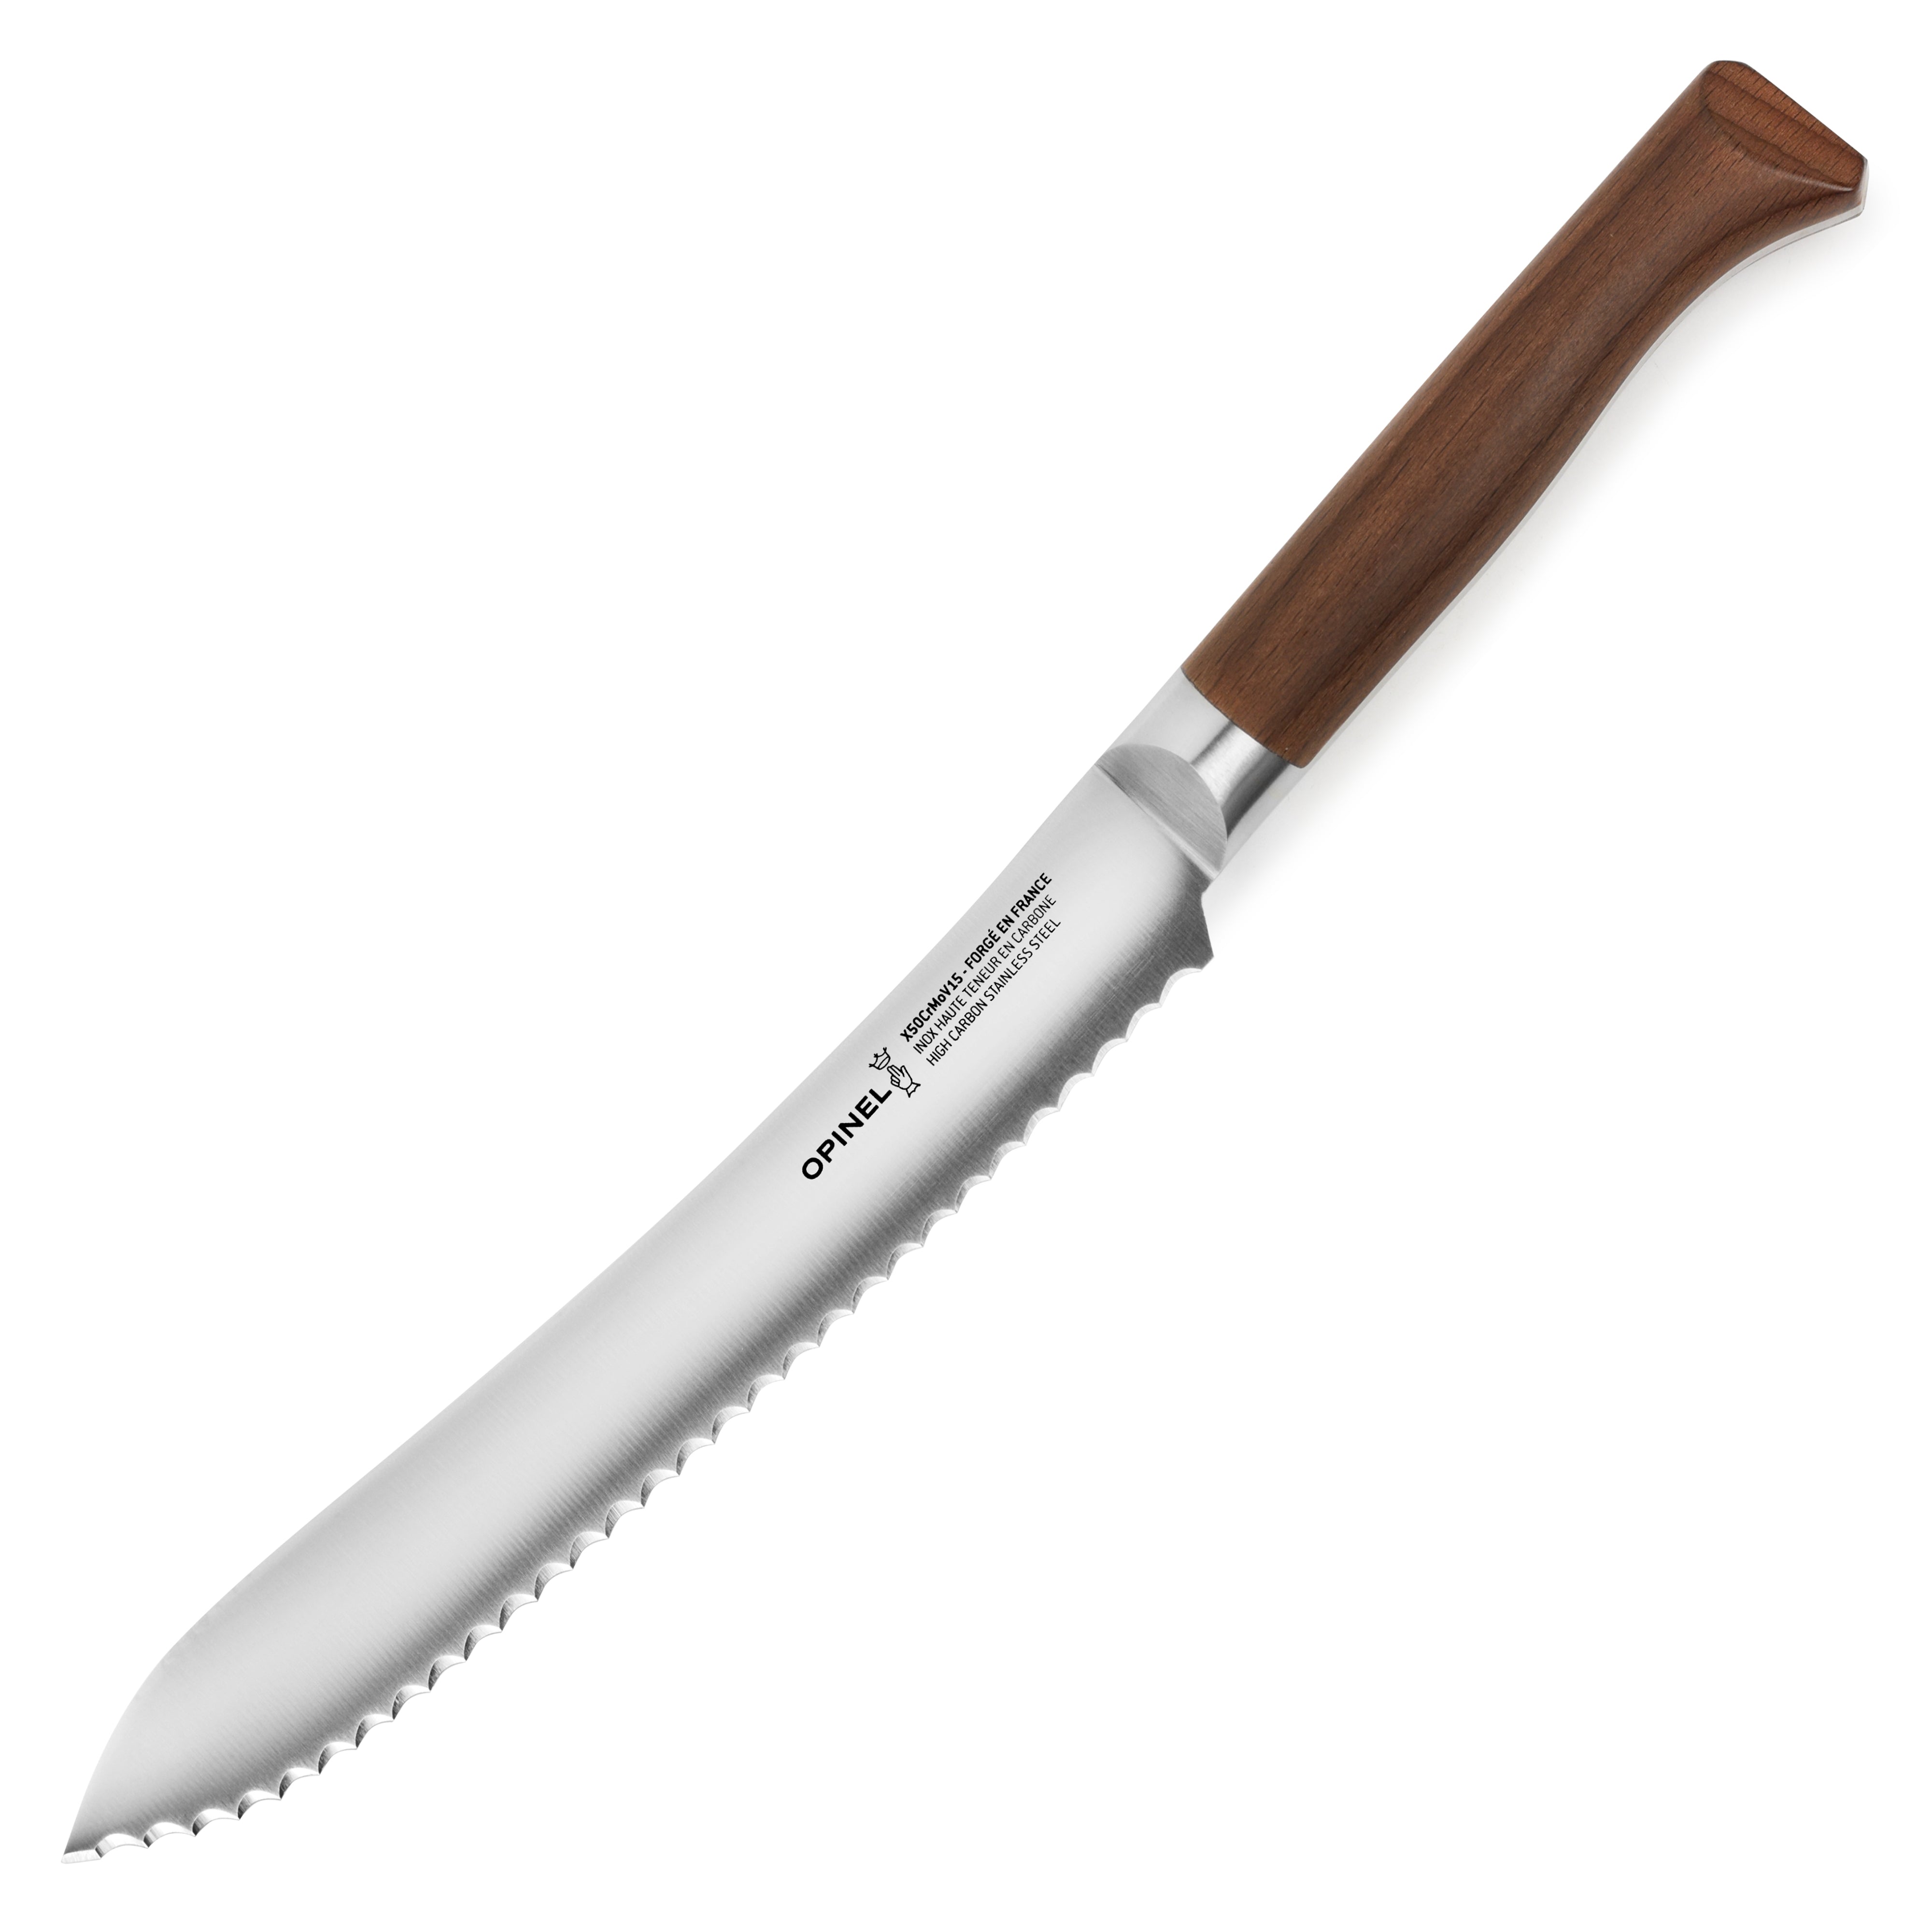 Opinel Forged 1890 Bread Knife 8" – Cutlery and More